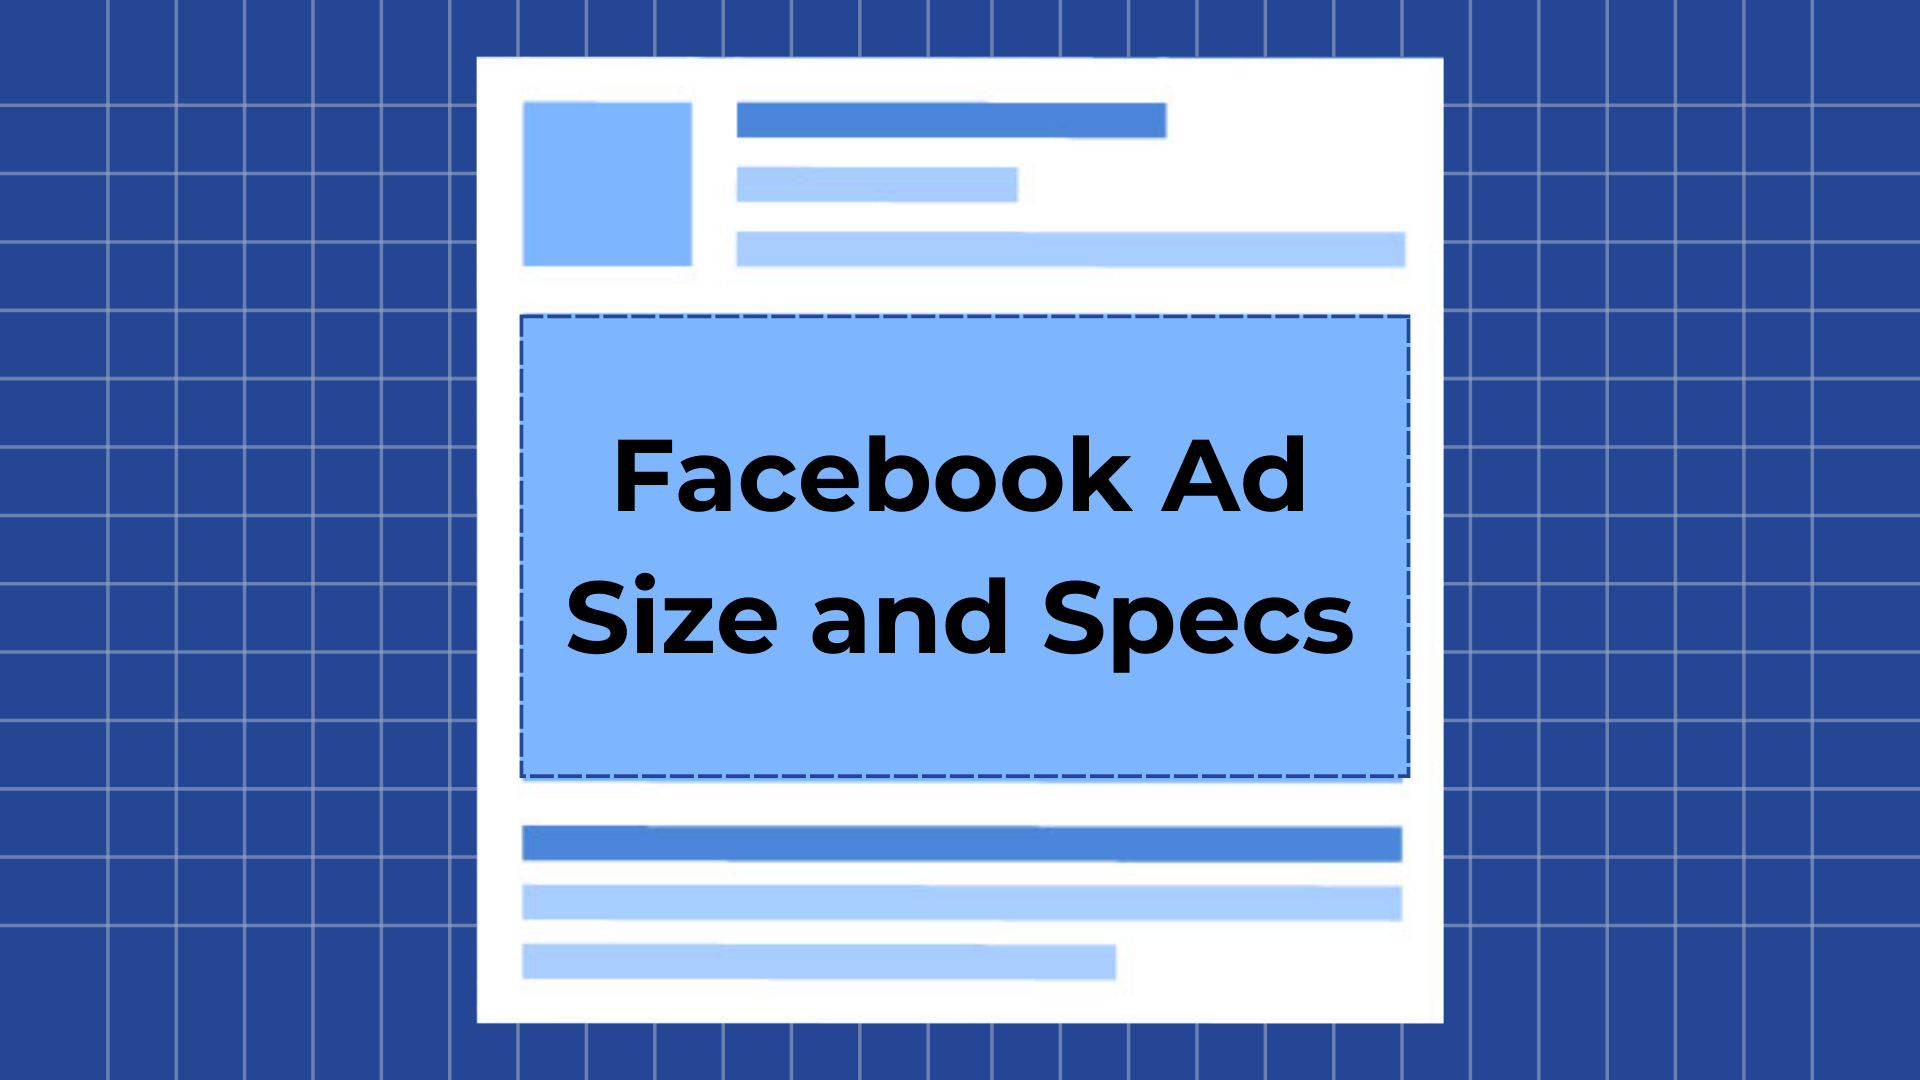 Facebook Ad Size and Specs: A Beginner’s Guide